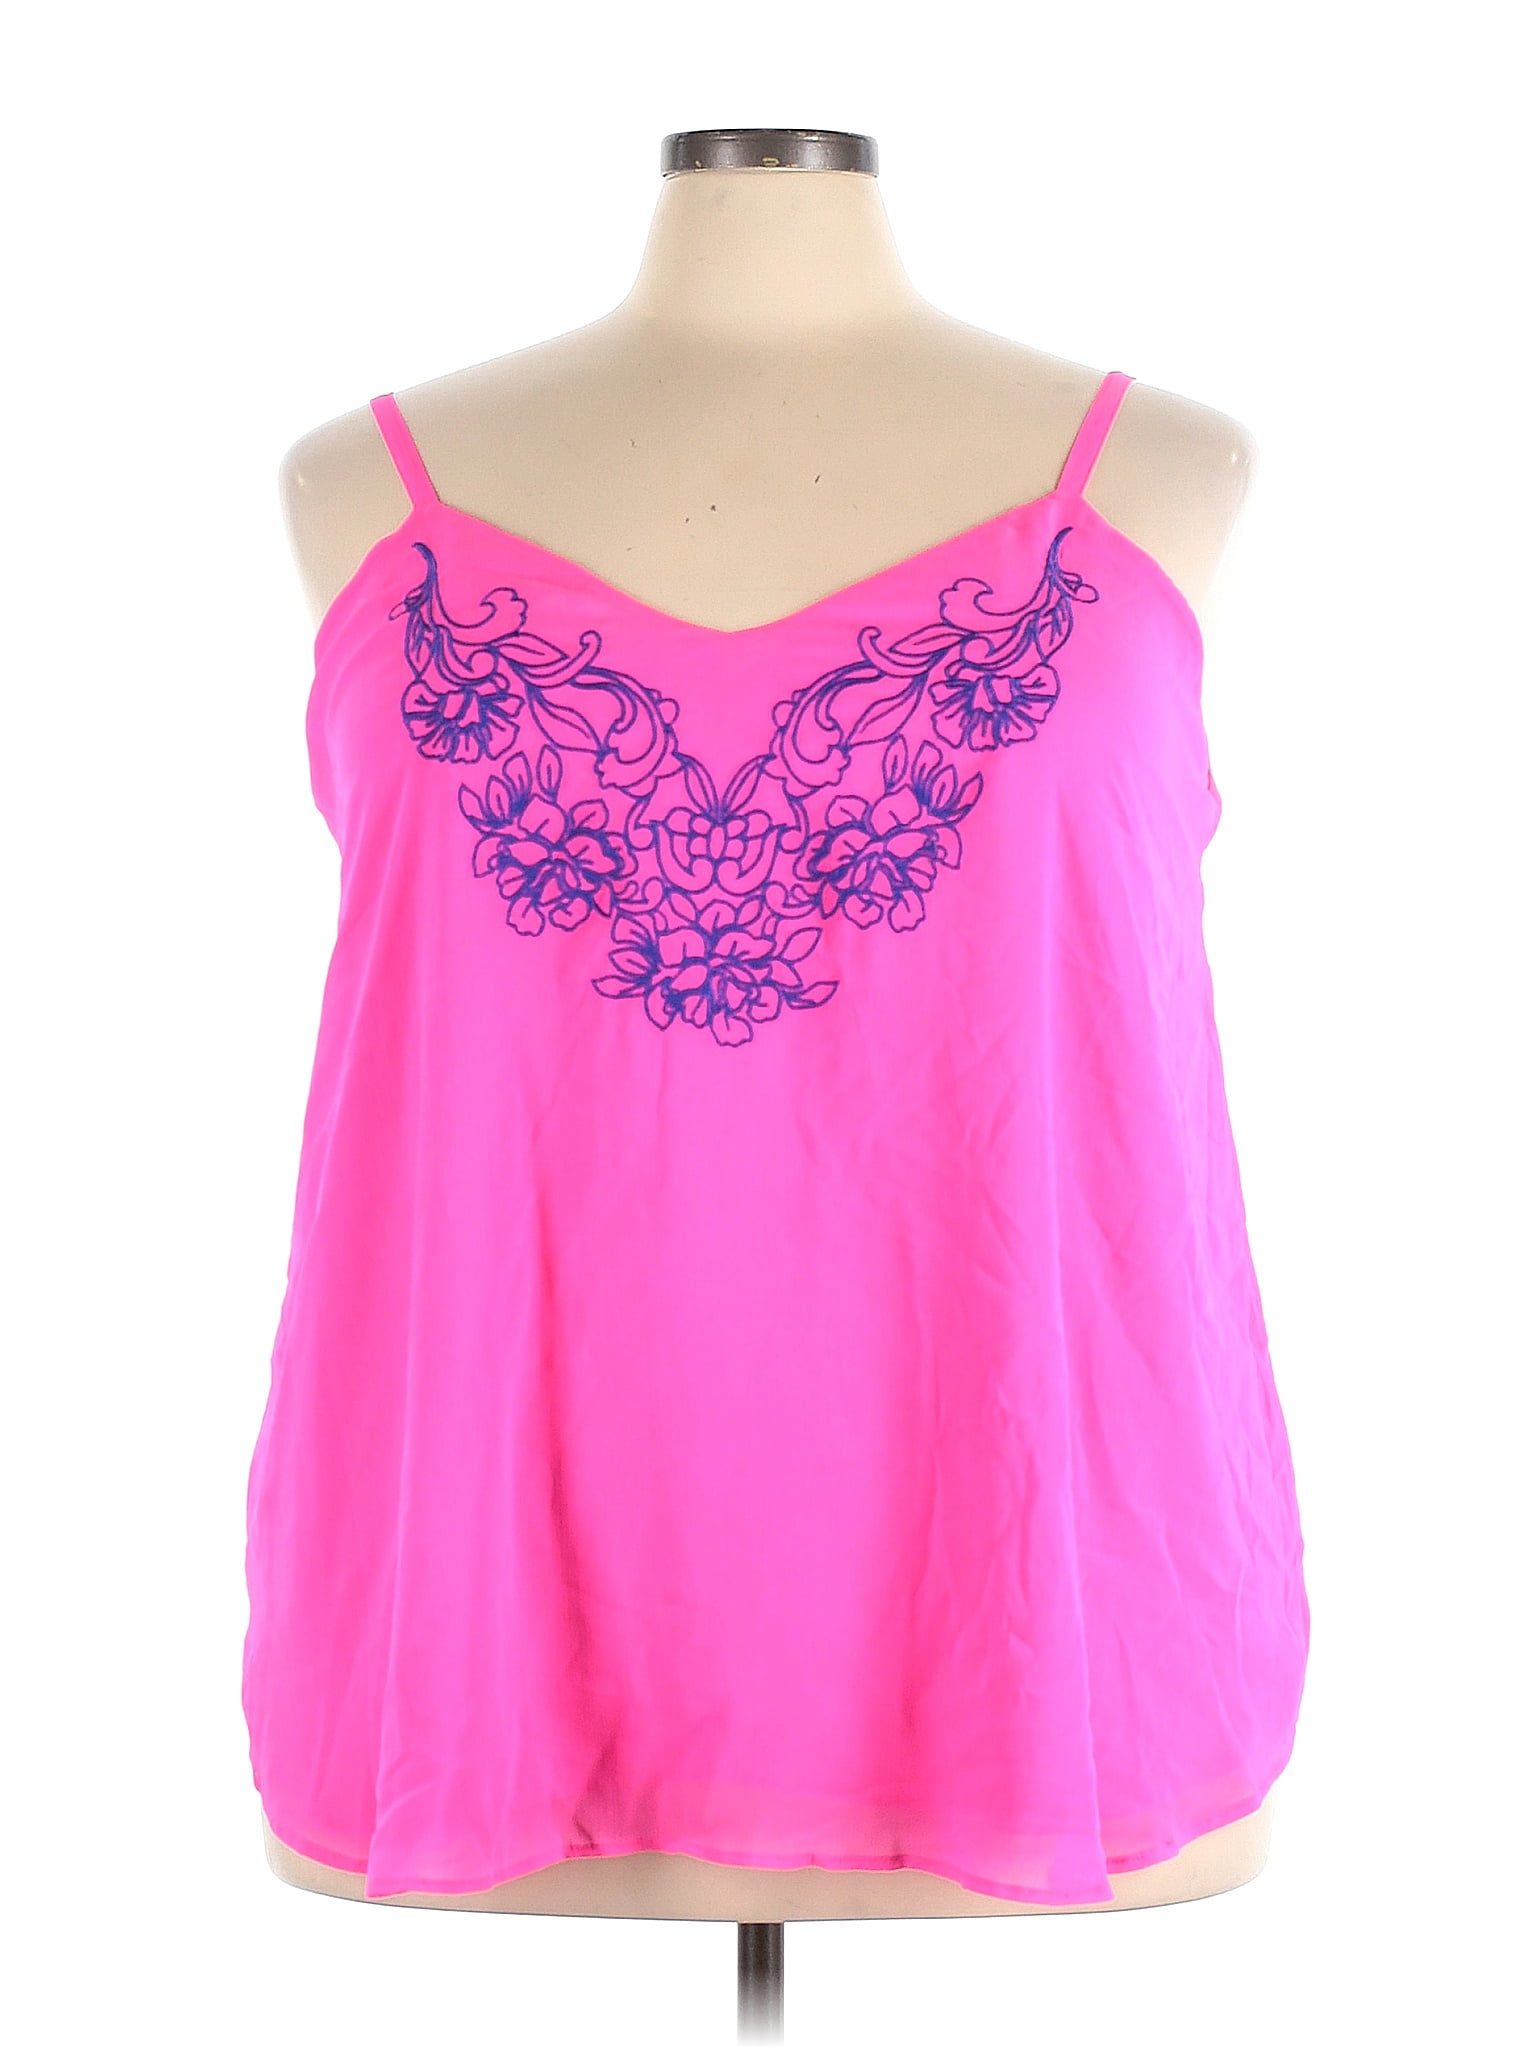 Torrid 100% Polyester Floral Pink Sleeveless Blouse Size 3X Plus (3) (Plus)  - 57% off